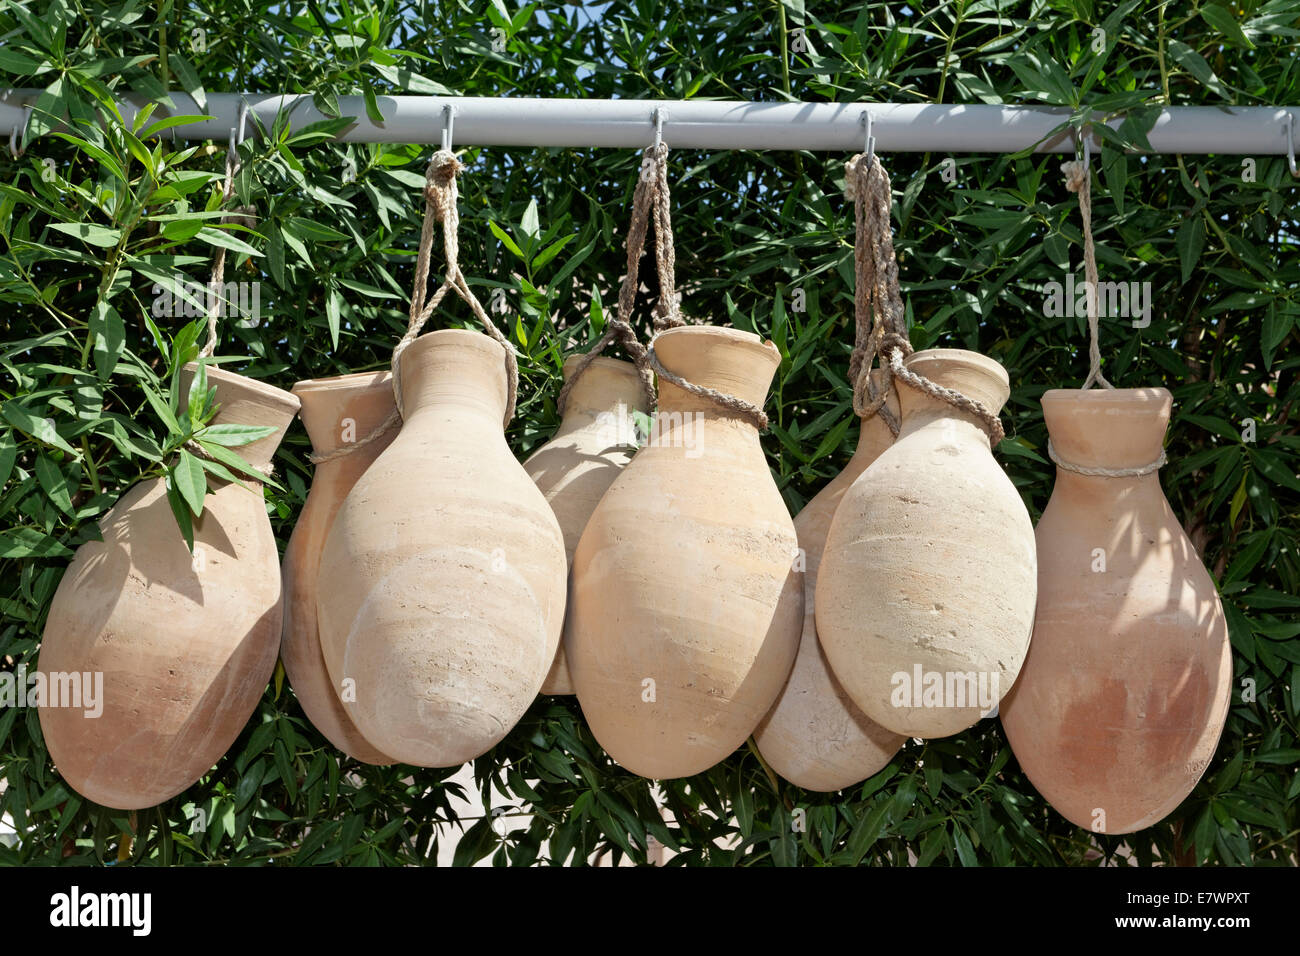 Clay jugs hanging in front of oleander shrubs, Nakhl Fort or Husn Al Heem, Al-Batinah province, Sultanate of Oman Stock Photo